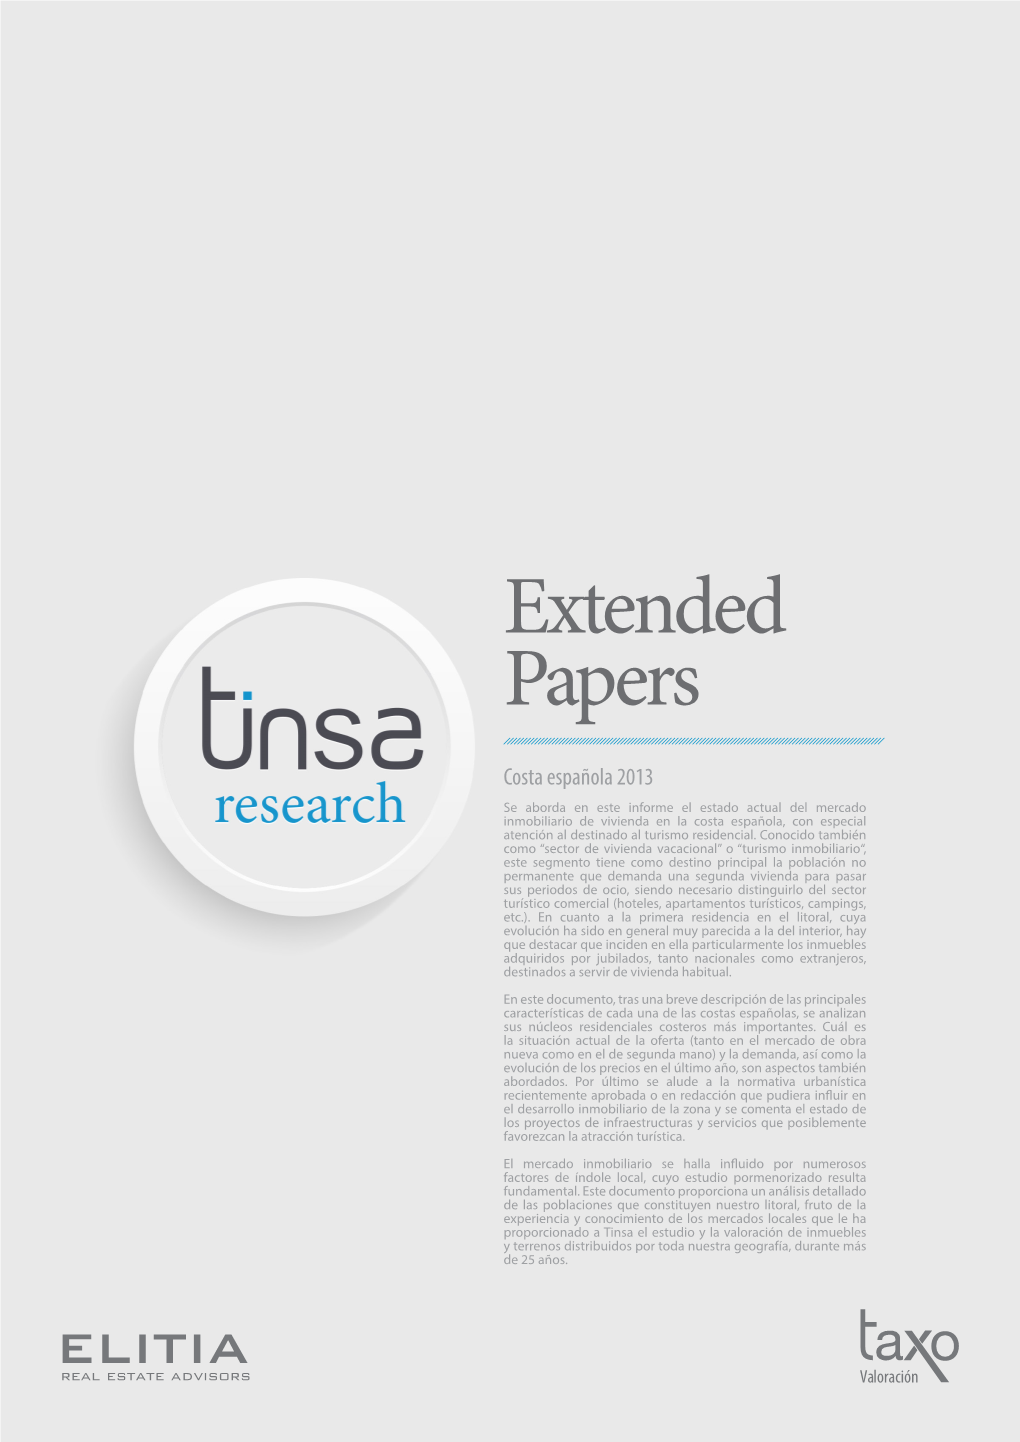 Extended Papers